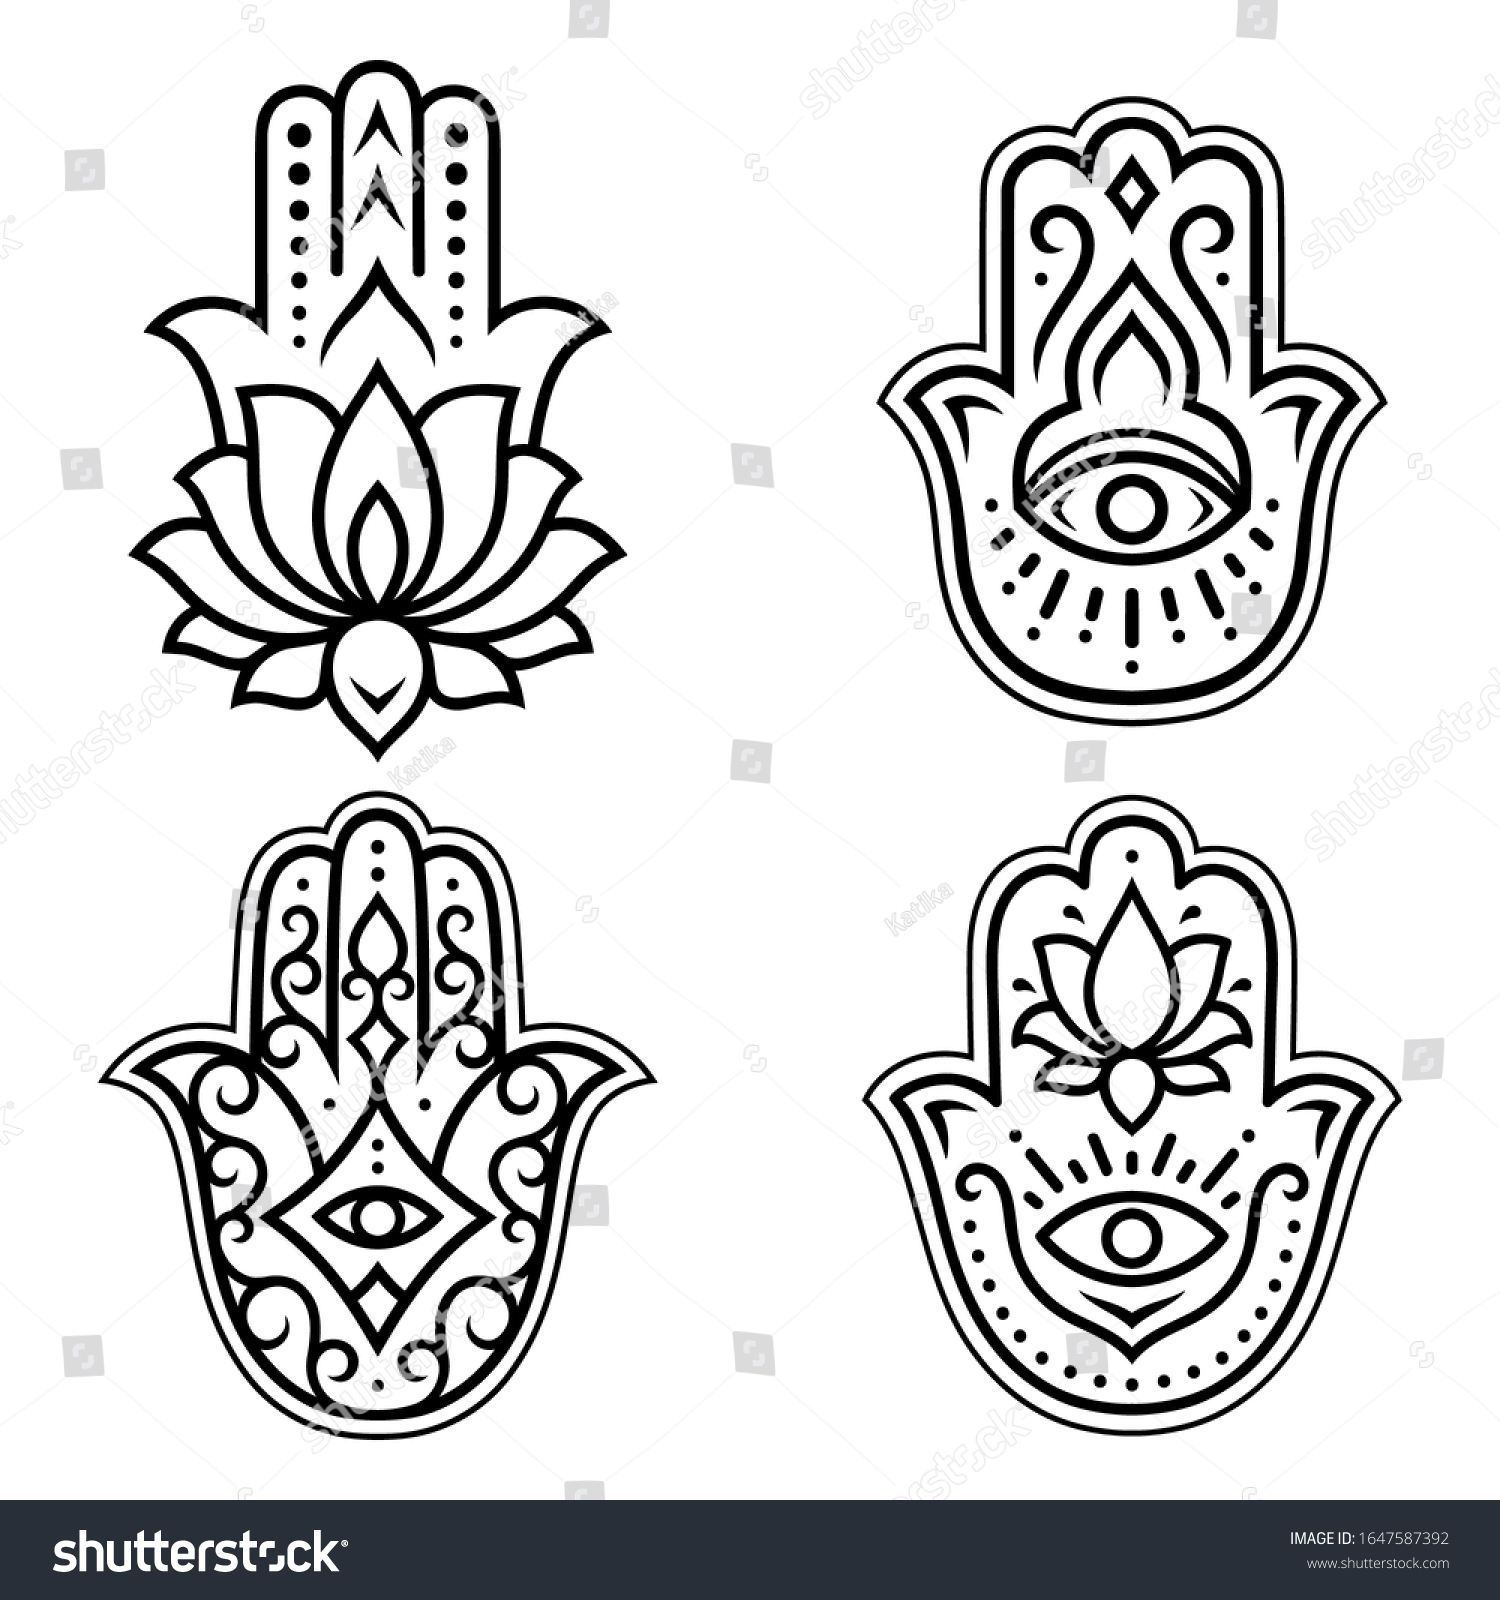 Set of Hamsa hand drawn symbol with lotus flower. Decorative pattern in oriental style for interior decoration and henna drawings. The ancient sign of "Hand of Fatima". #1647587392